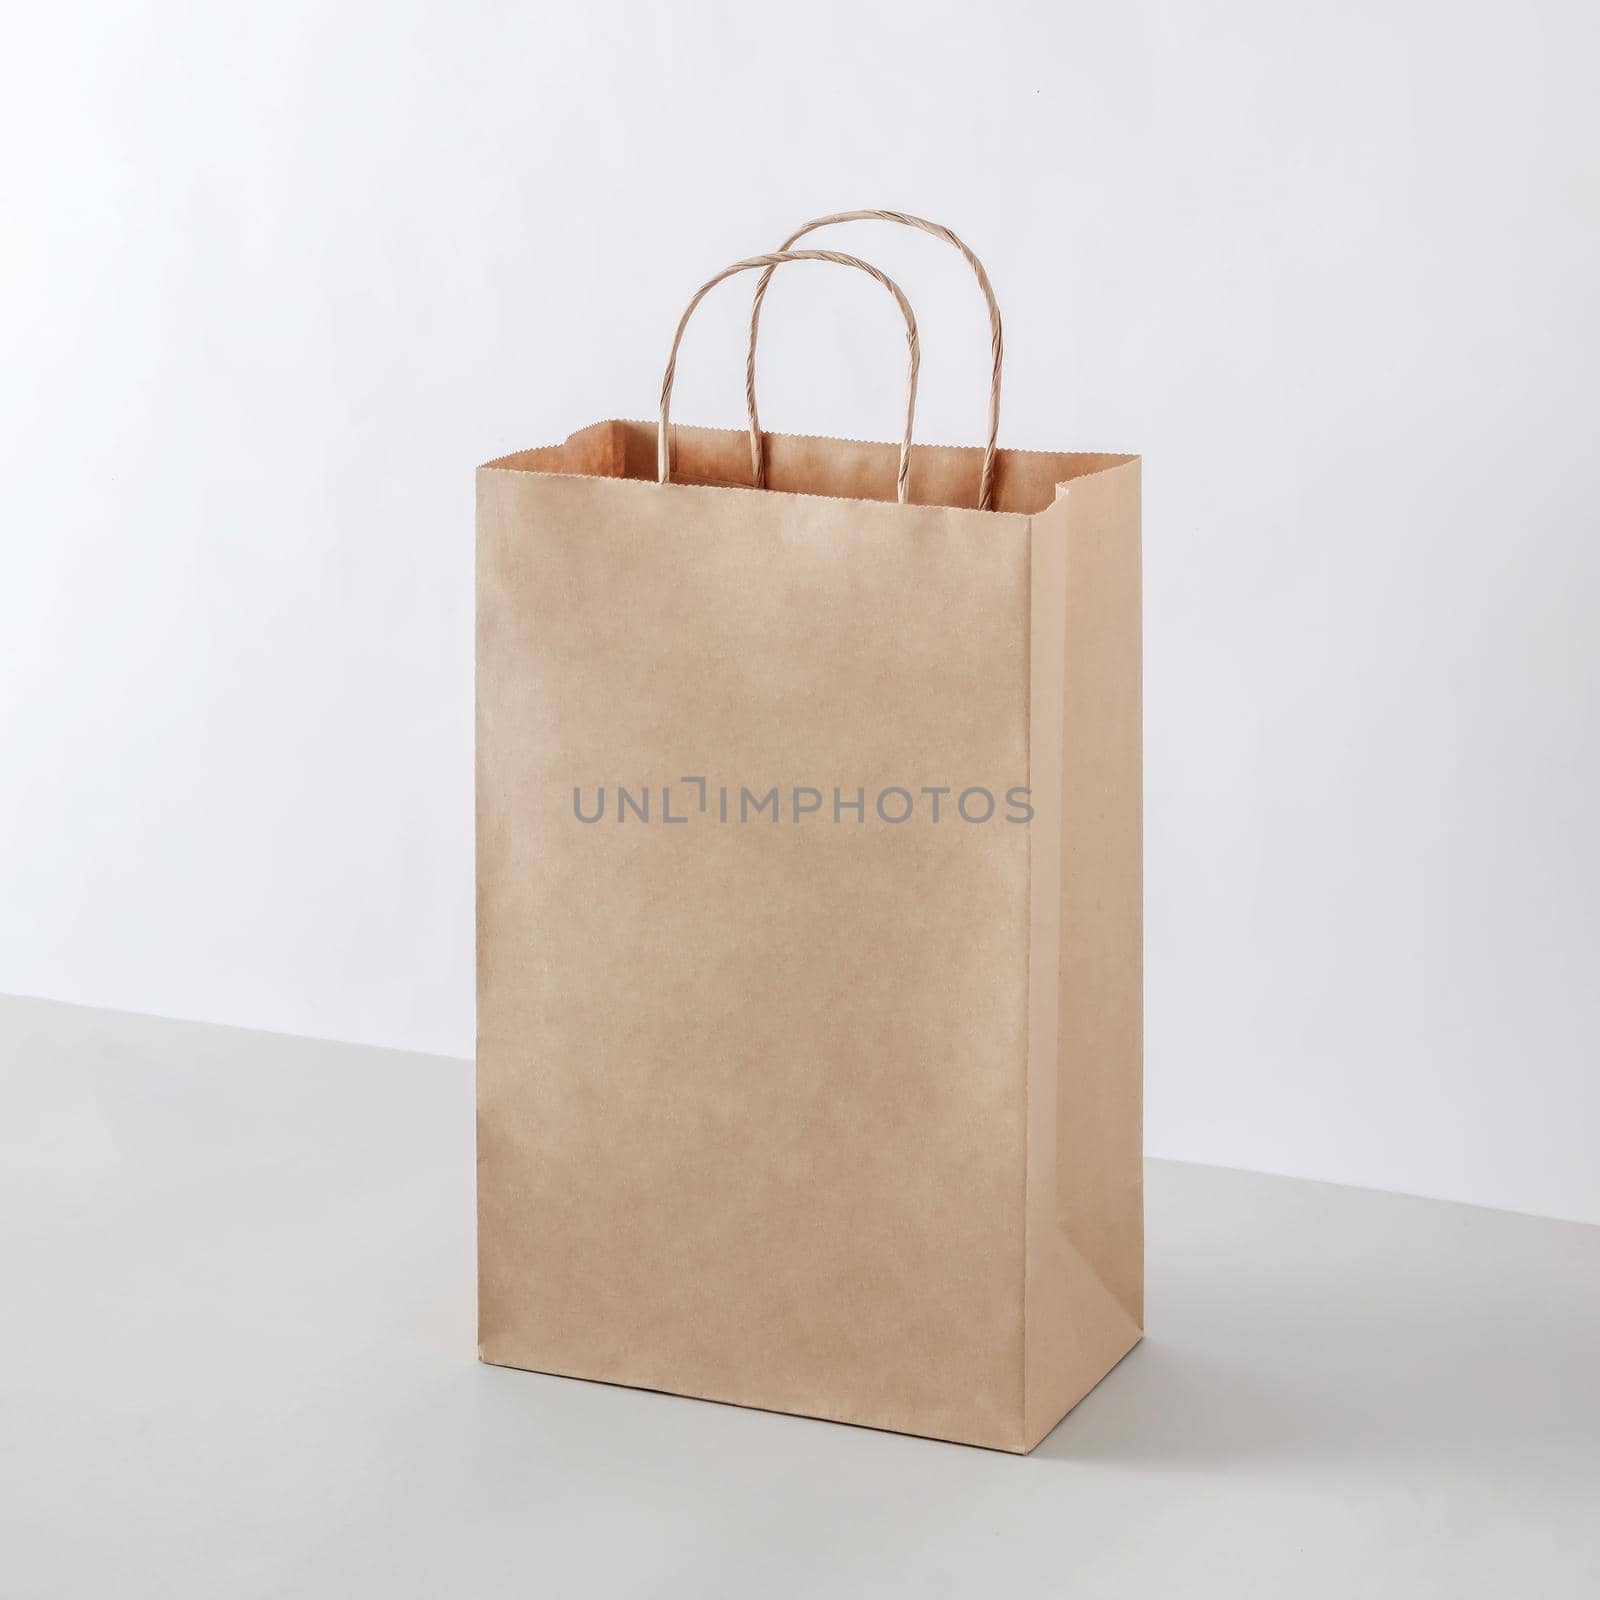 Cardboard package as a mockup for a business selling a purchase in a store. Paper for recycling and delivery.